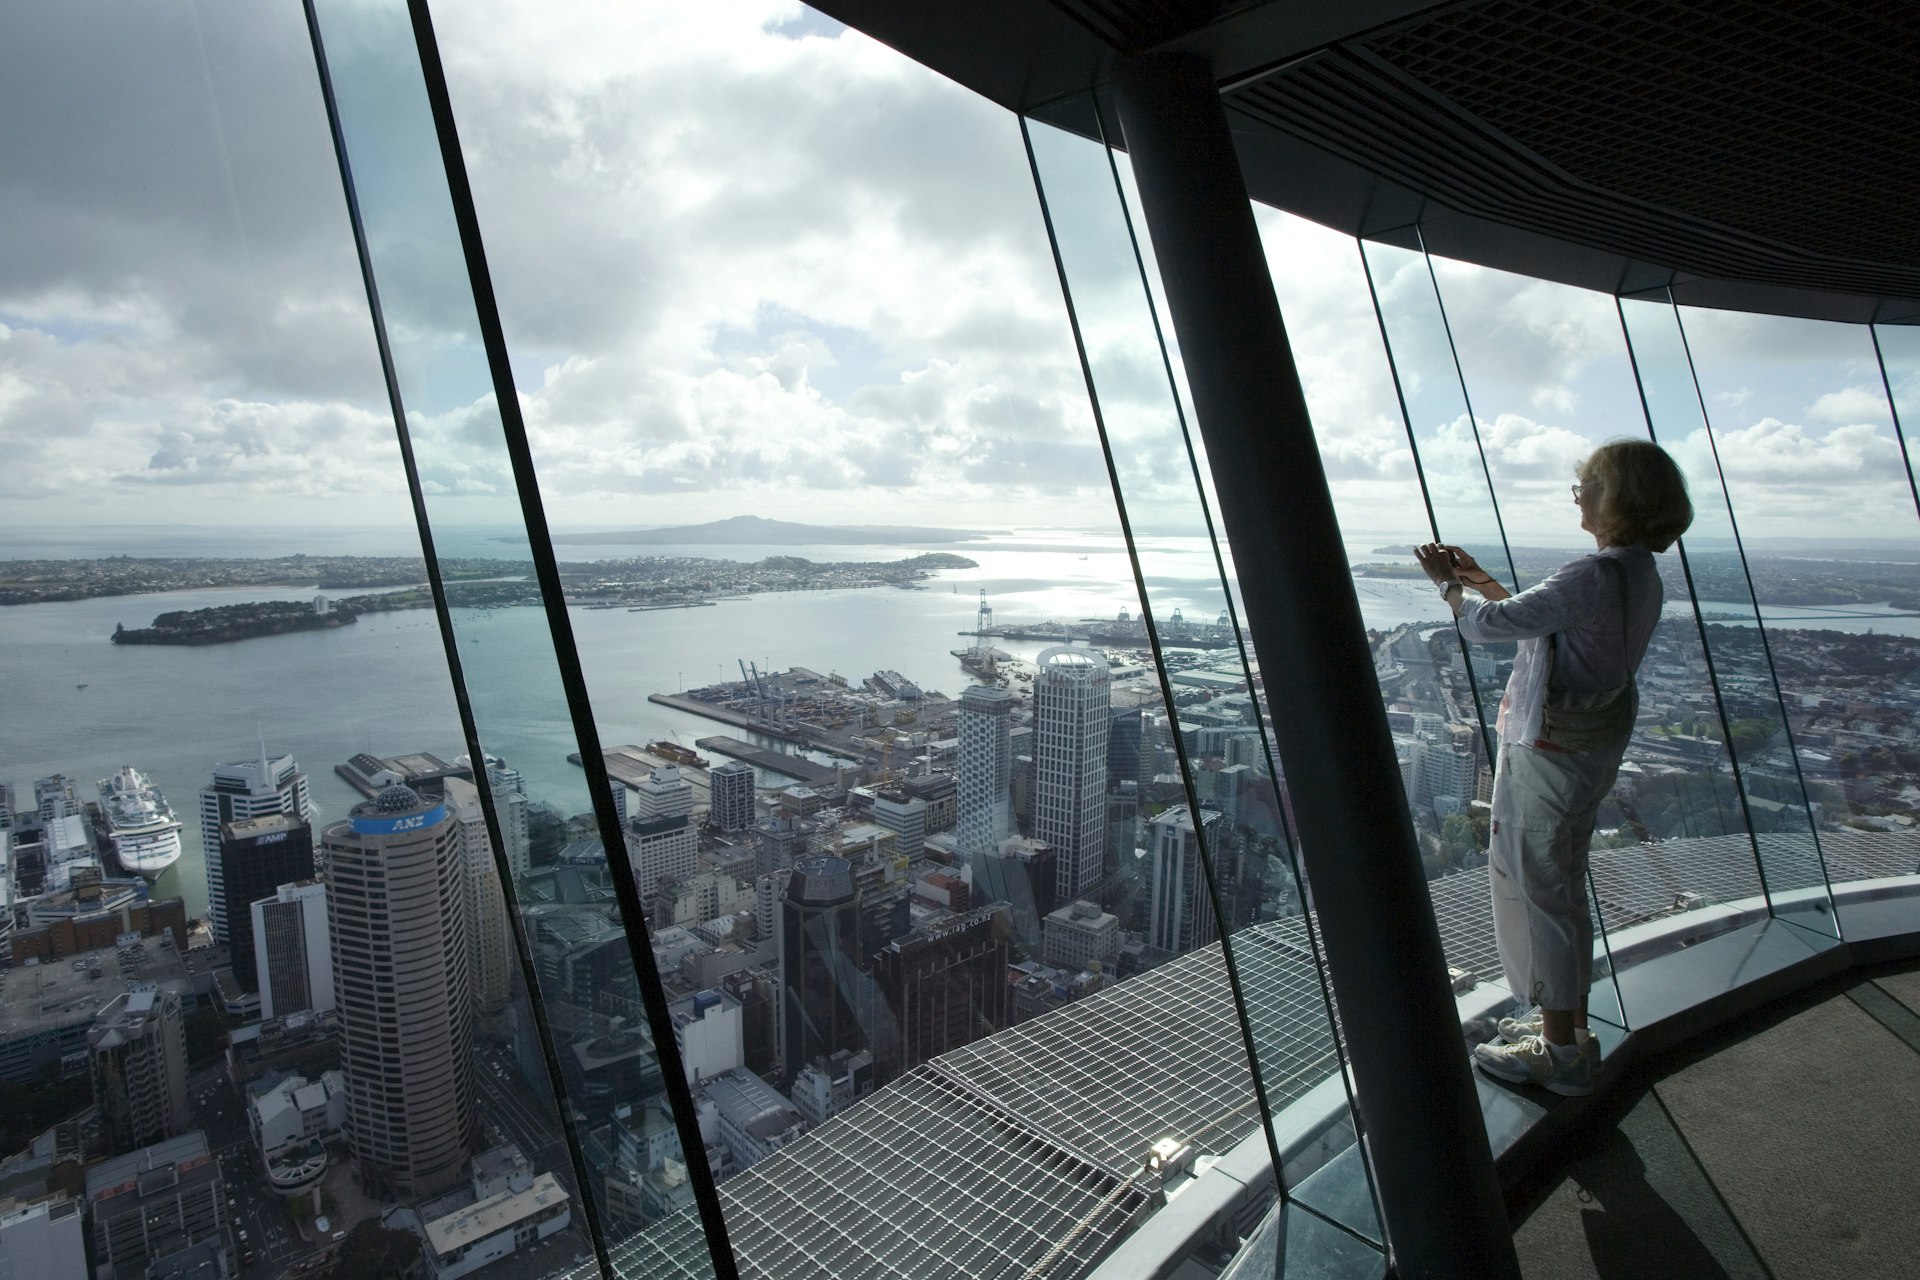 Photographing epic Auckland views from Sky Tower © Holger Leue / Getty Images